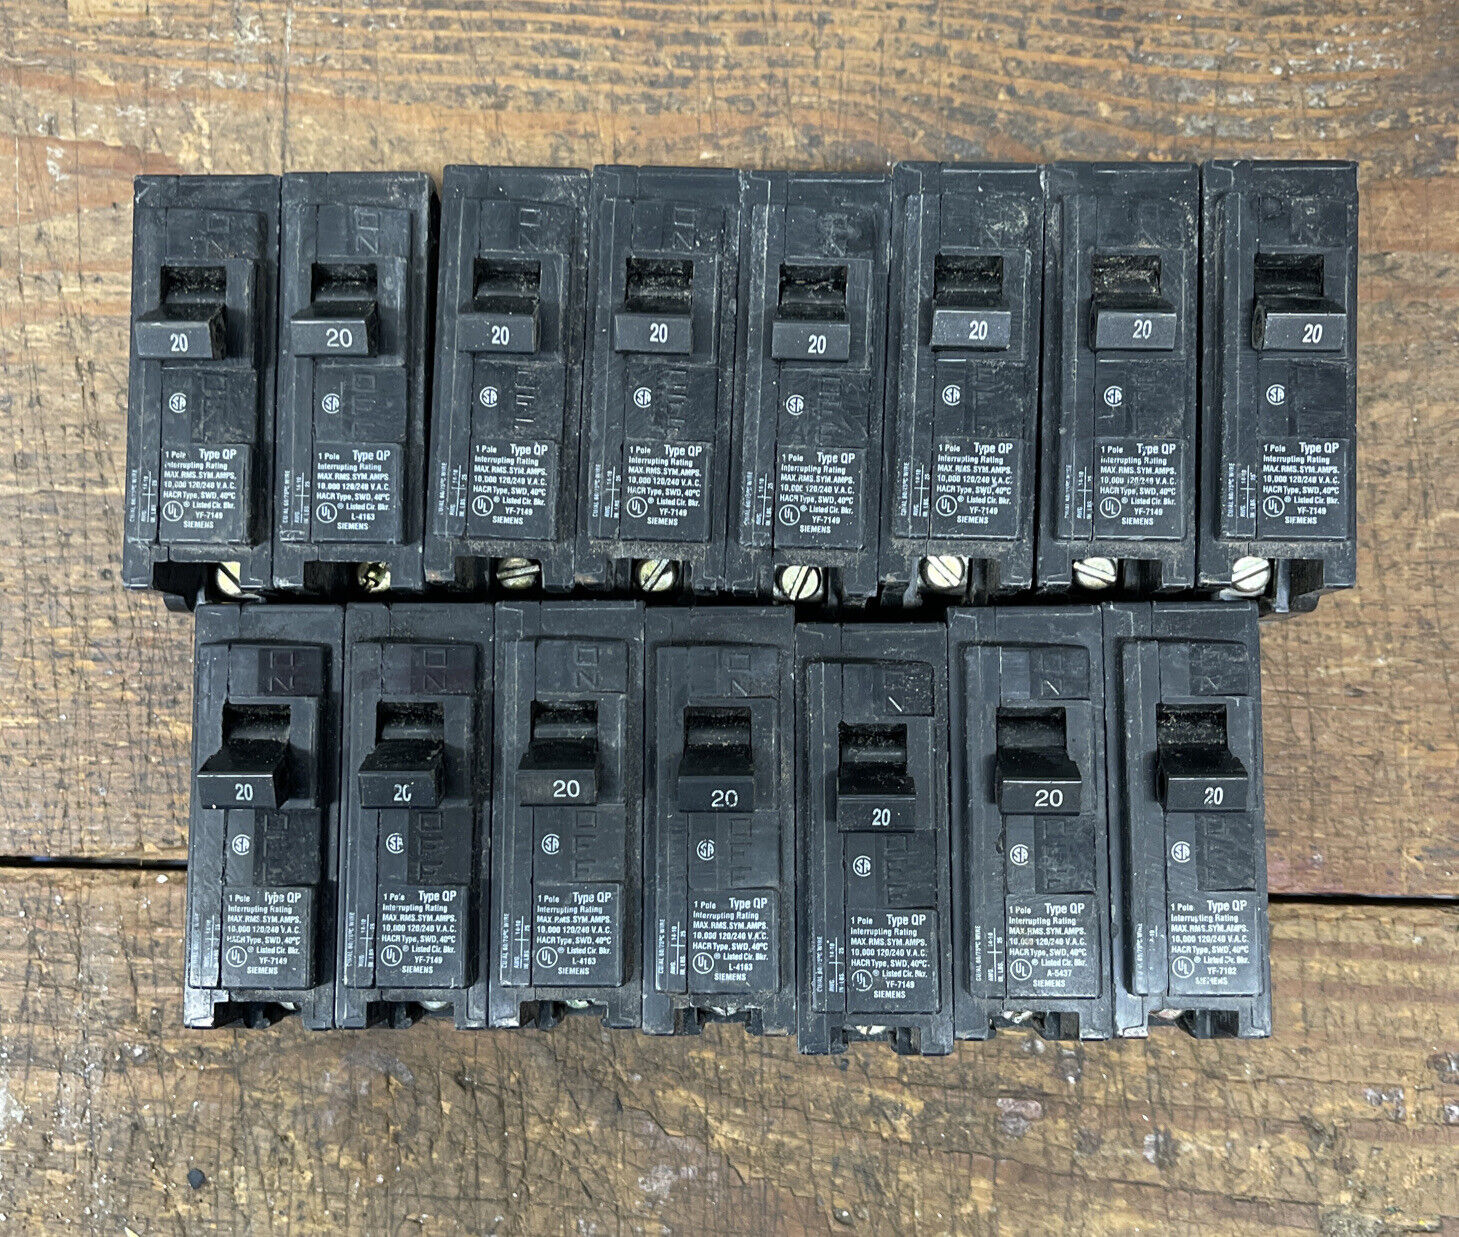 LOT OF 15 - SIEMENS ITE GOULD Q120 1 Pole 20 Amp 120/240 Circuit Breakers